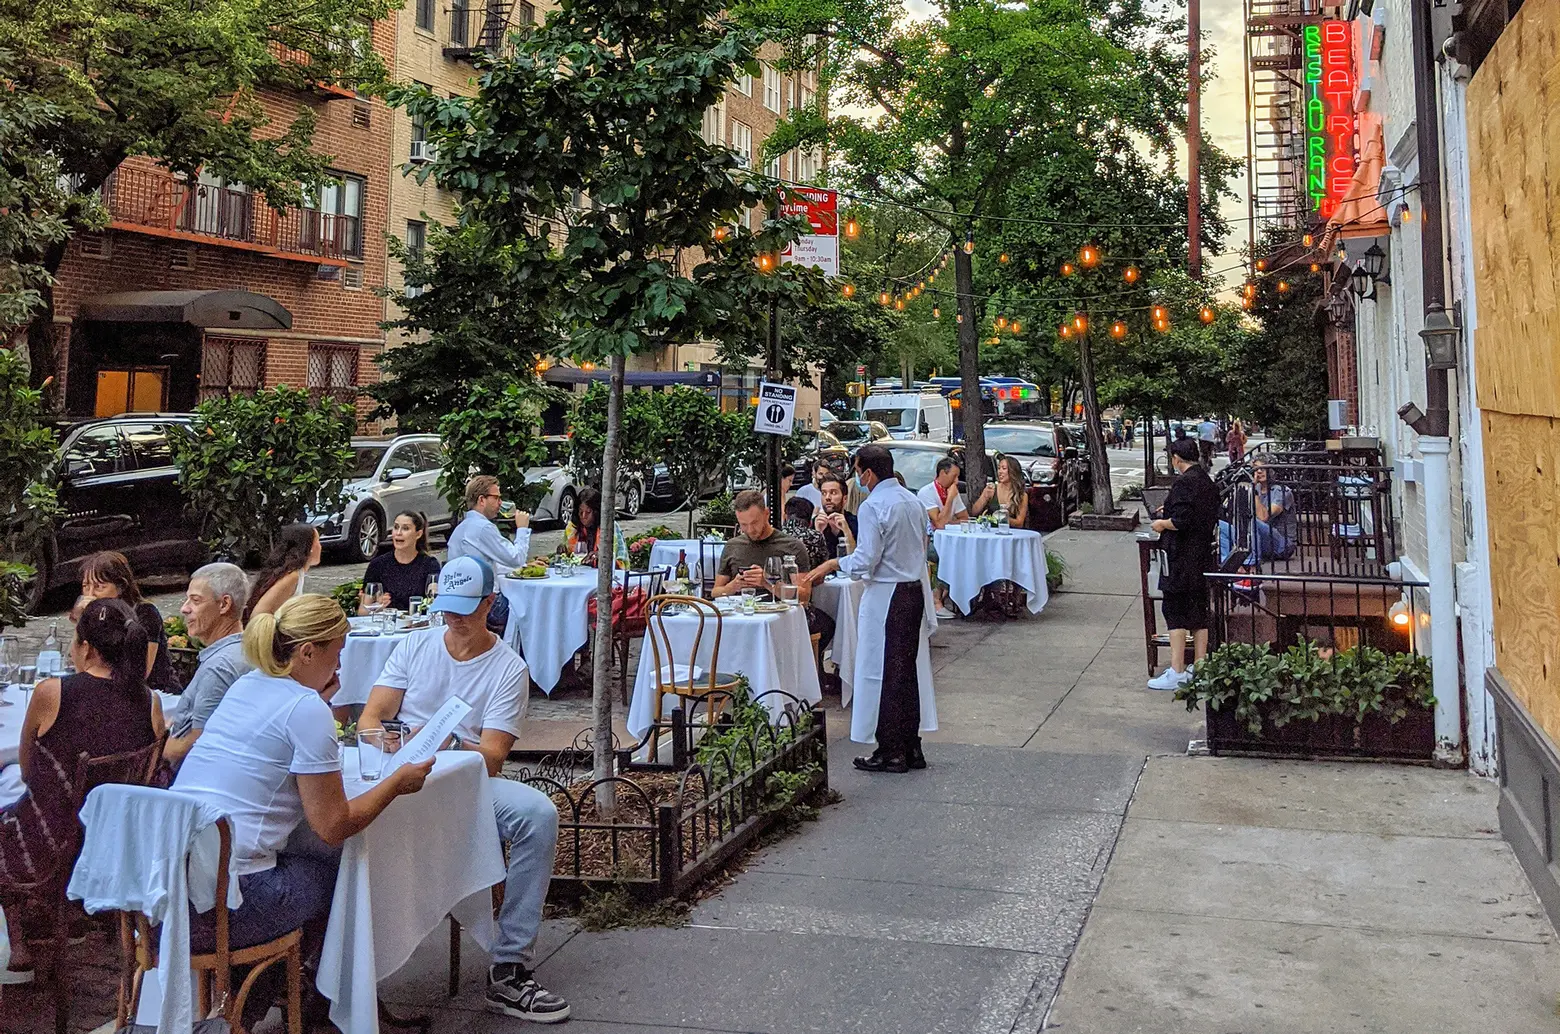 Outdoor dining in NYC will be extended through October